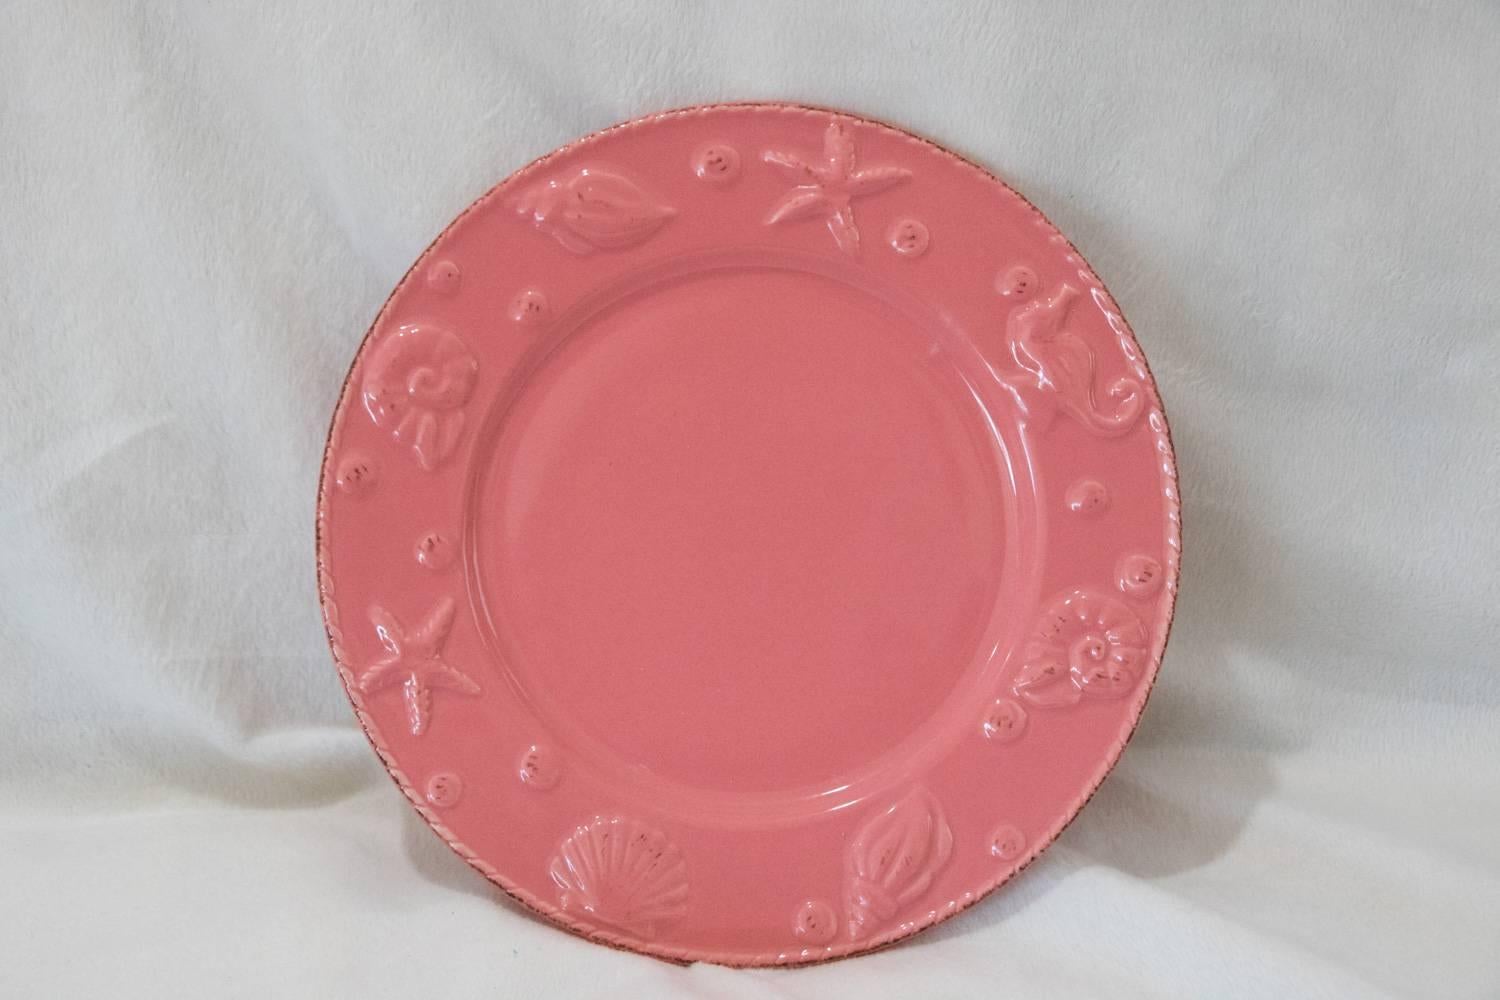 Dainty set of four punch pink seashell design lunch plates, add a pop of spring to any occasion. This set is a dainty addition to a mundane table setting. Perimeter has a variety of seashell designs.
Measure: Diameter: 8 inches, height 0.7 inches.